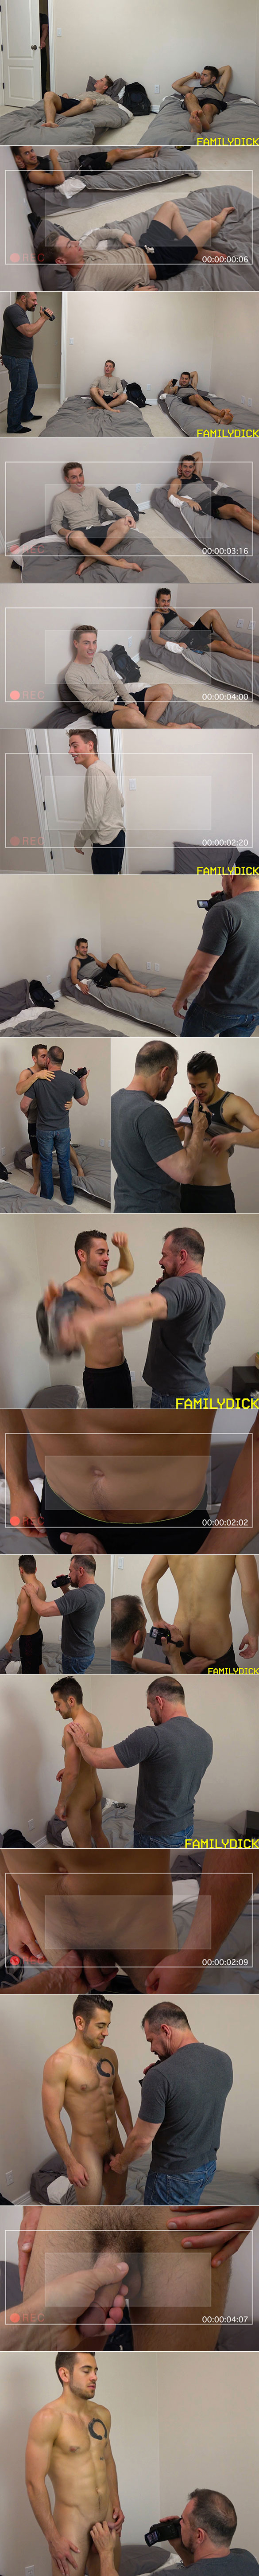 FamilyDick: "My Dad’s a Pervert – Chapter 2: Dad Fucks Son's College Roommate"